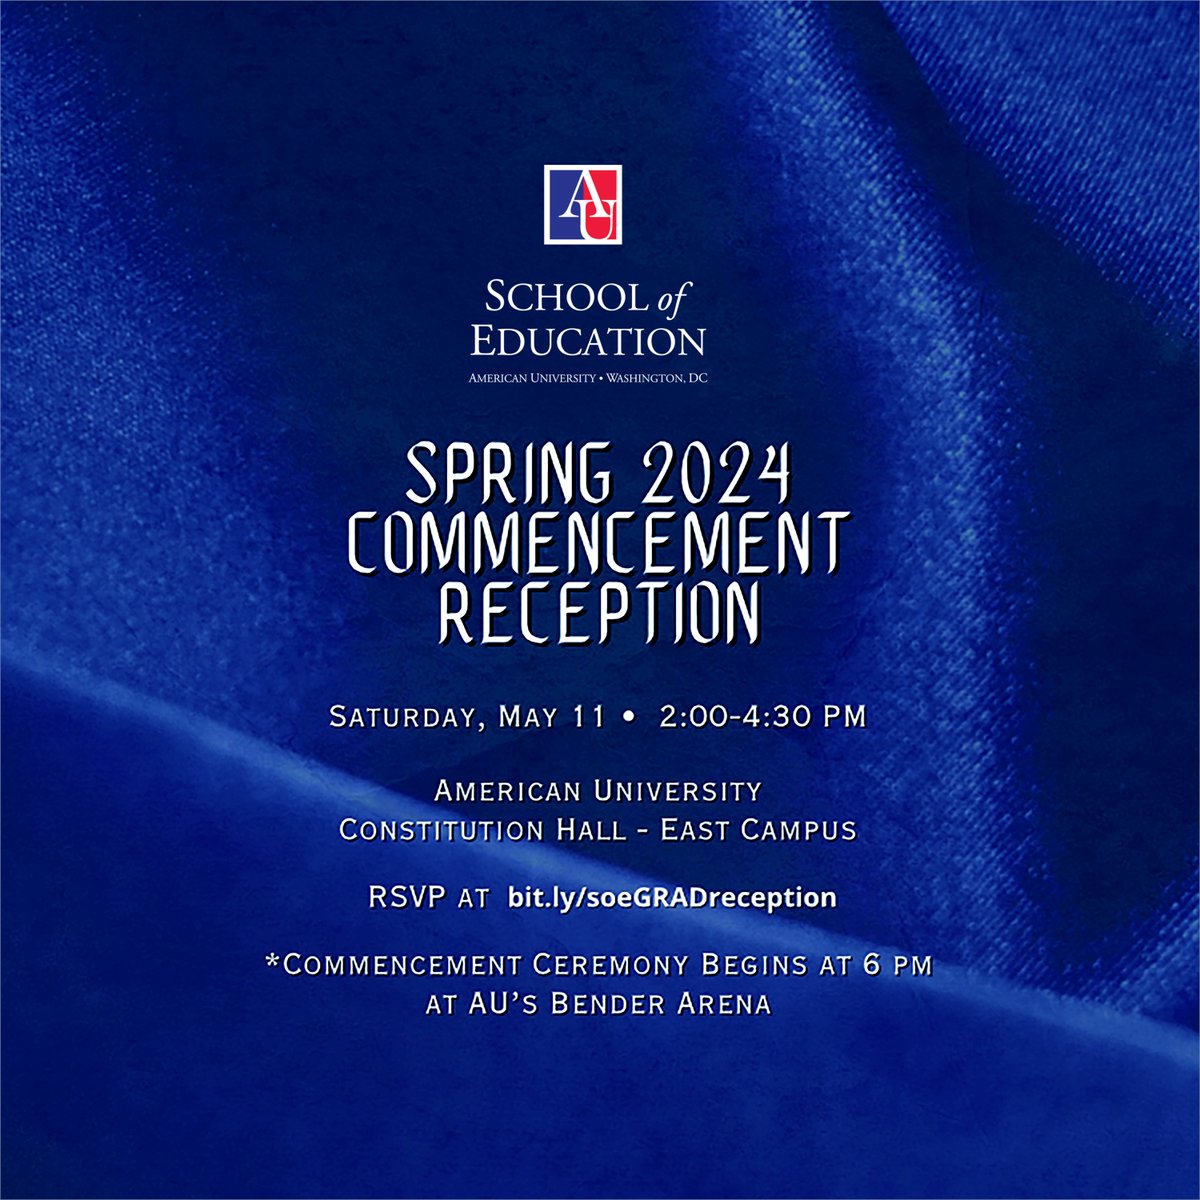 Spring 2024 🦅 graduates! You are invited to join us on Saturday, May 11, at 2:00 p.m. at @AmericanU's Constitution Hall-East Campus for the School of Education Commencement Reception as the SOE #community celebrates your graduation. RSVP at bit.ly/soeGRADrecepti… #2024AUGrad